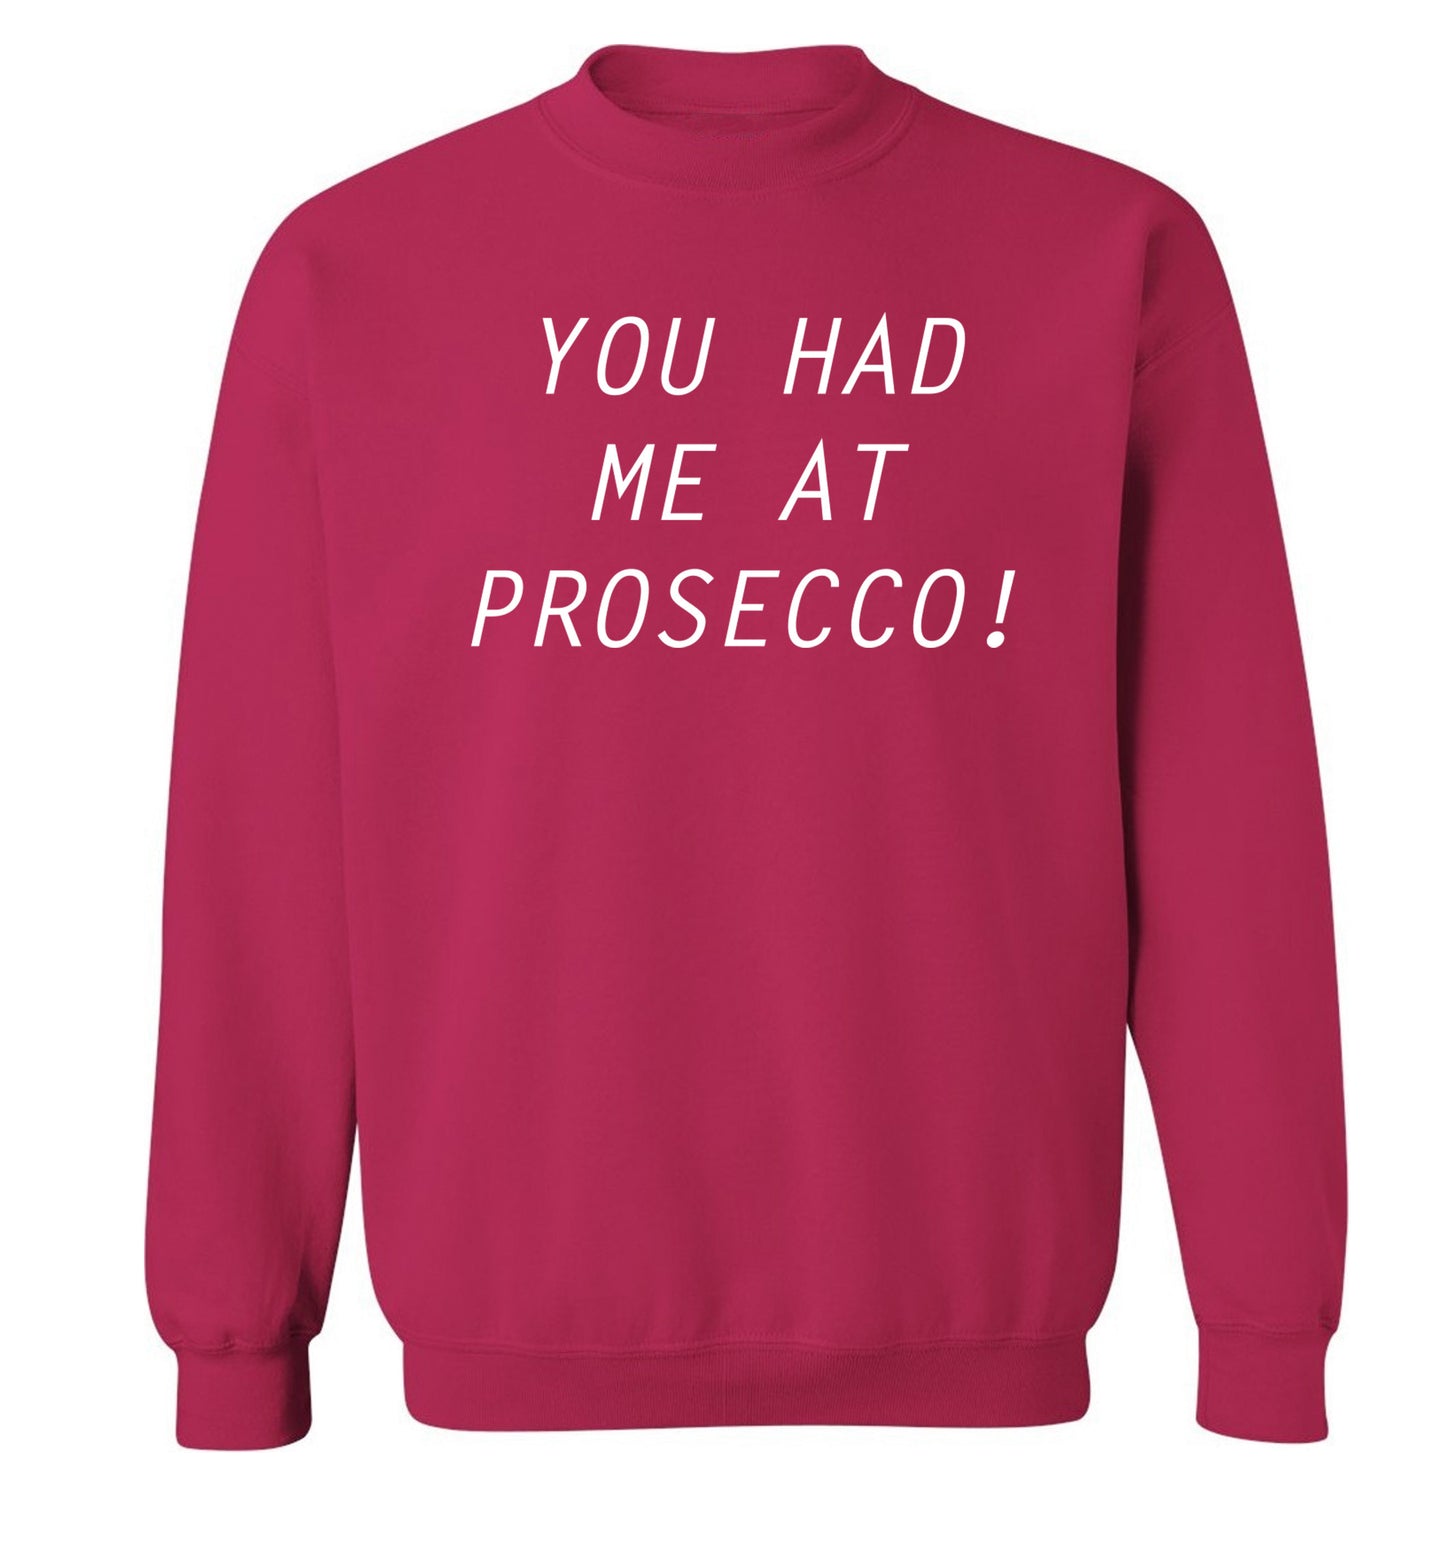 You had me at prosecco Adult's unisex pink Sweater 2XL